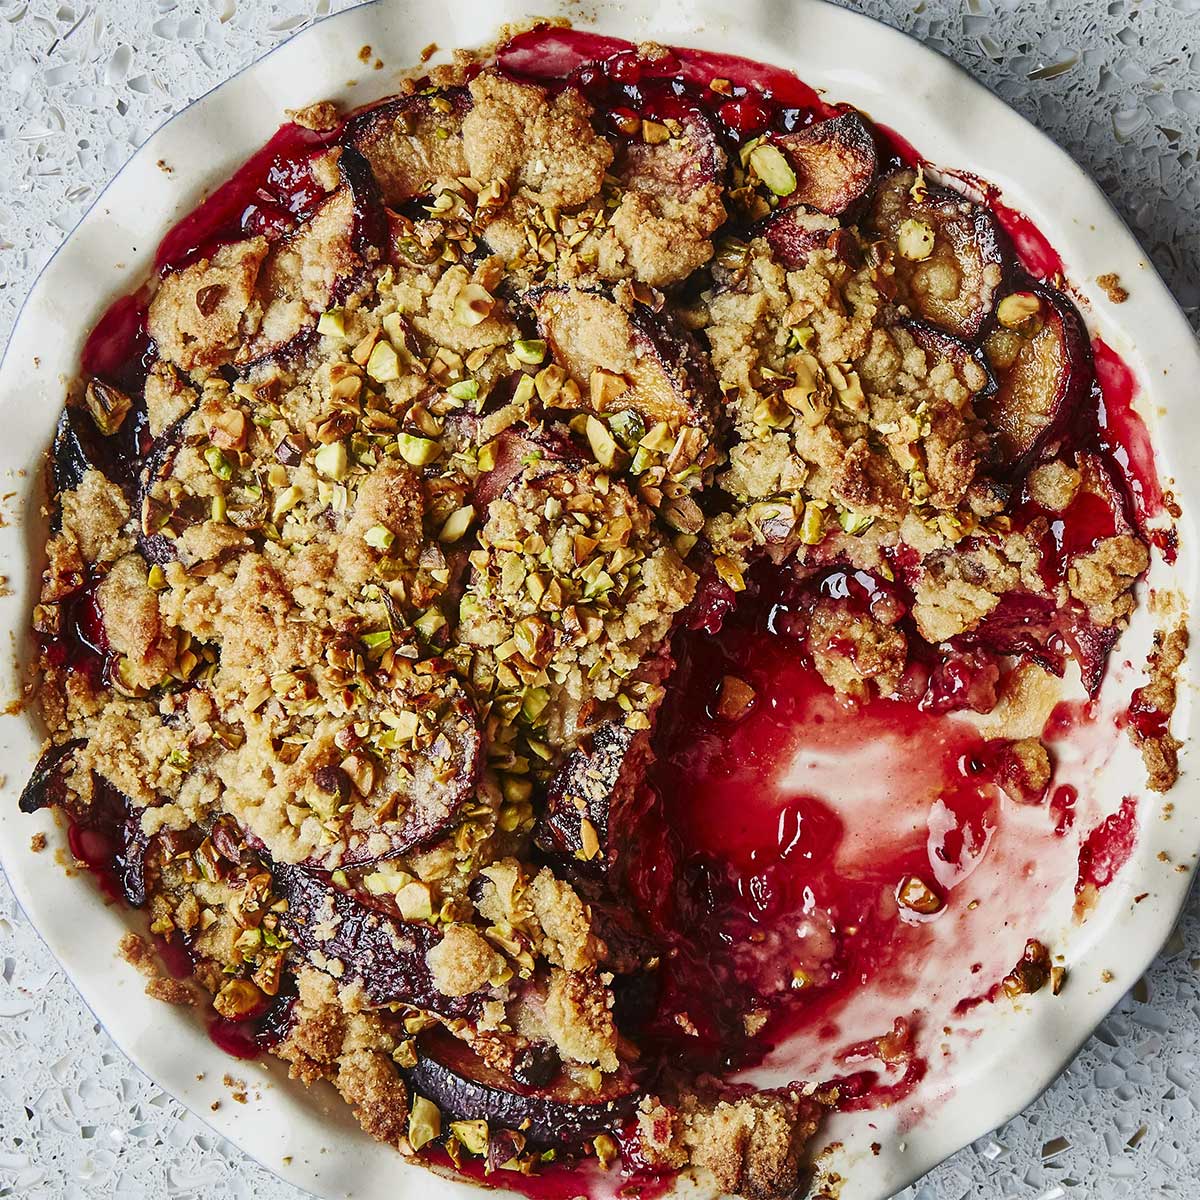 Plum-Cardamom Crumble with Pistachios